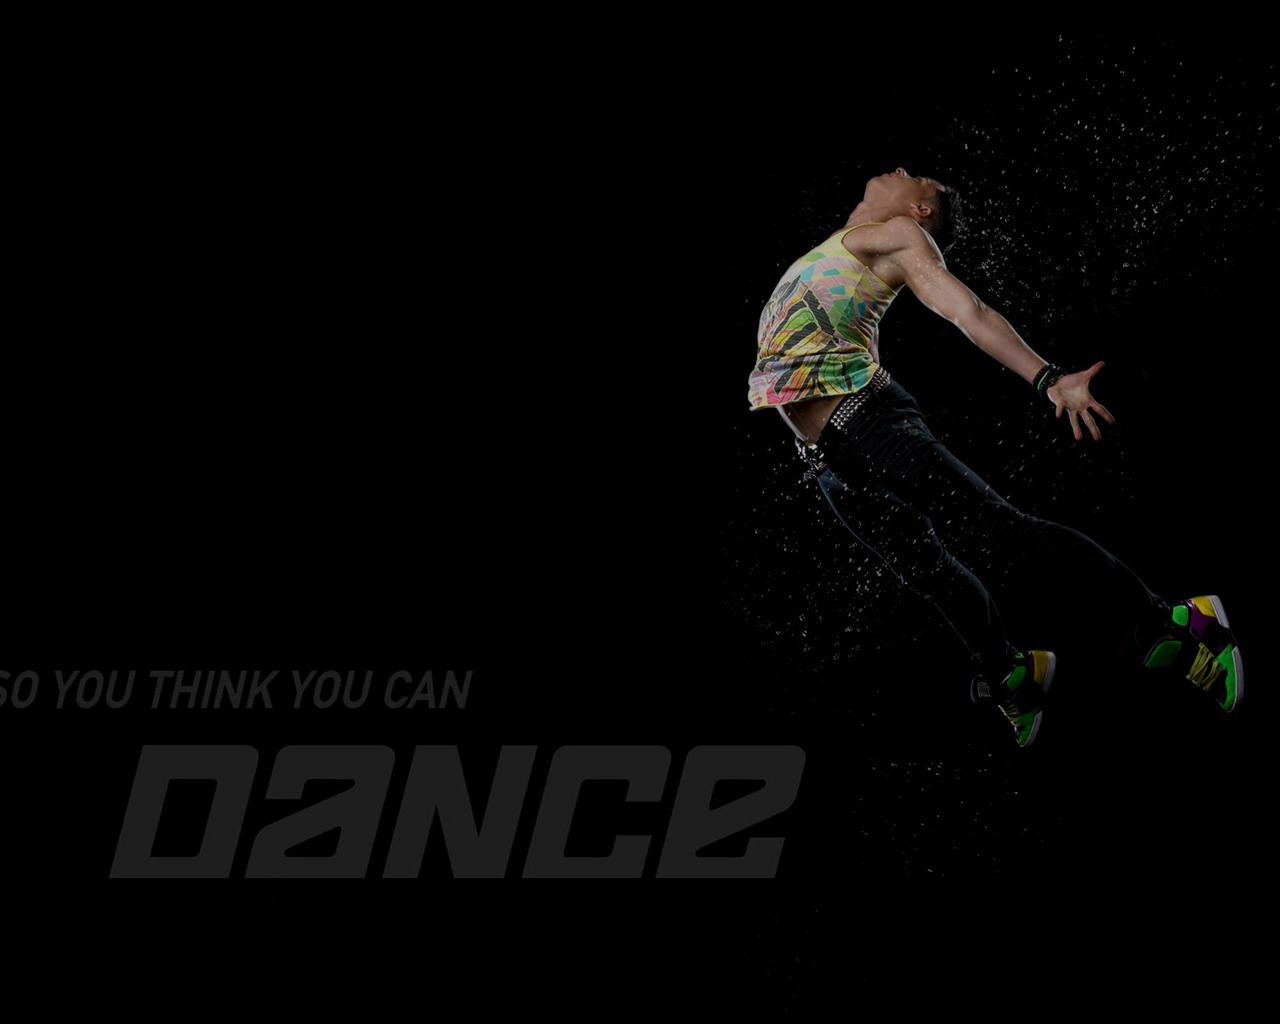 So You Think You Can Dance 舞林争霸 壁纸(二)6 - 1280x1024